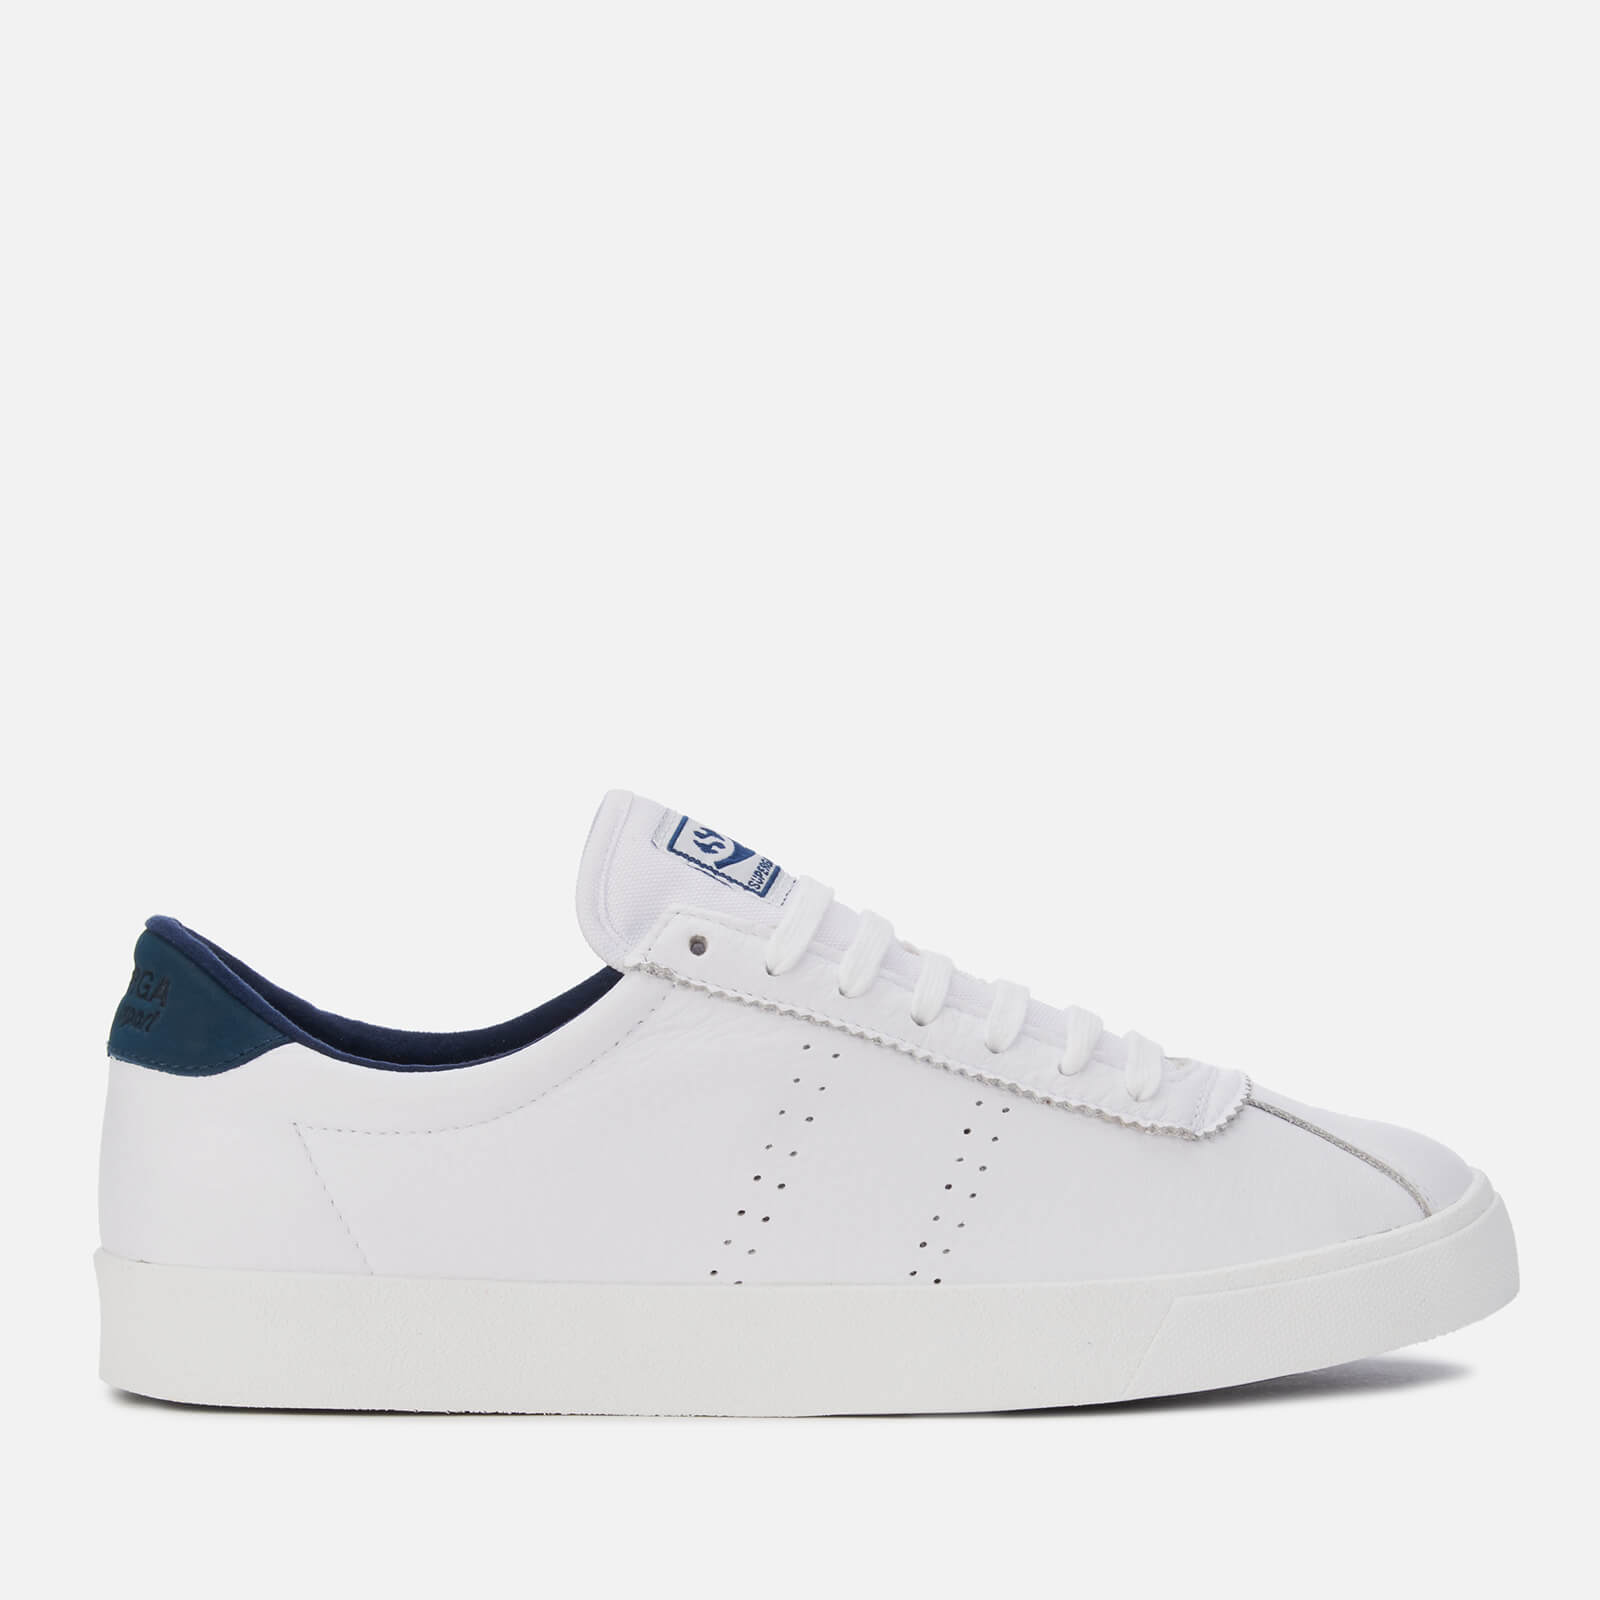 2843 Comfleau Trainers - White/Navy 